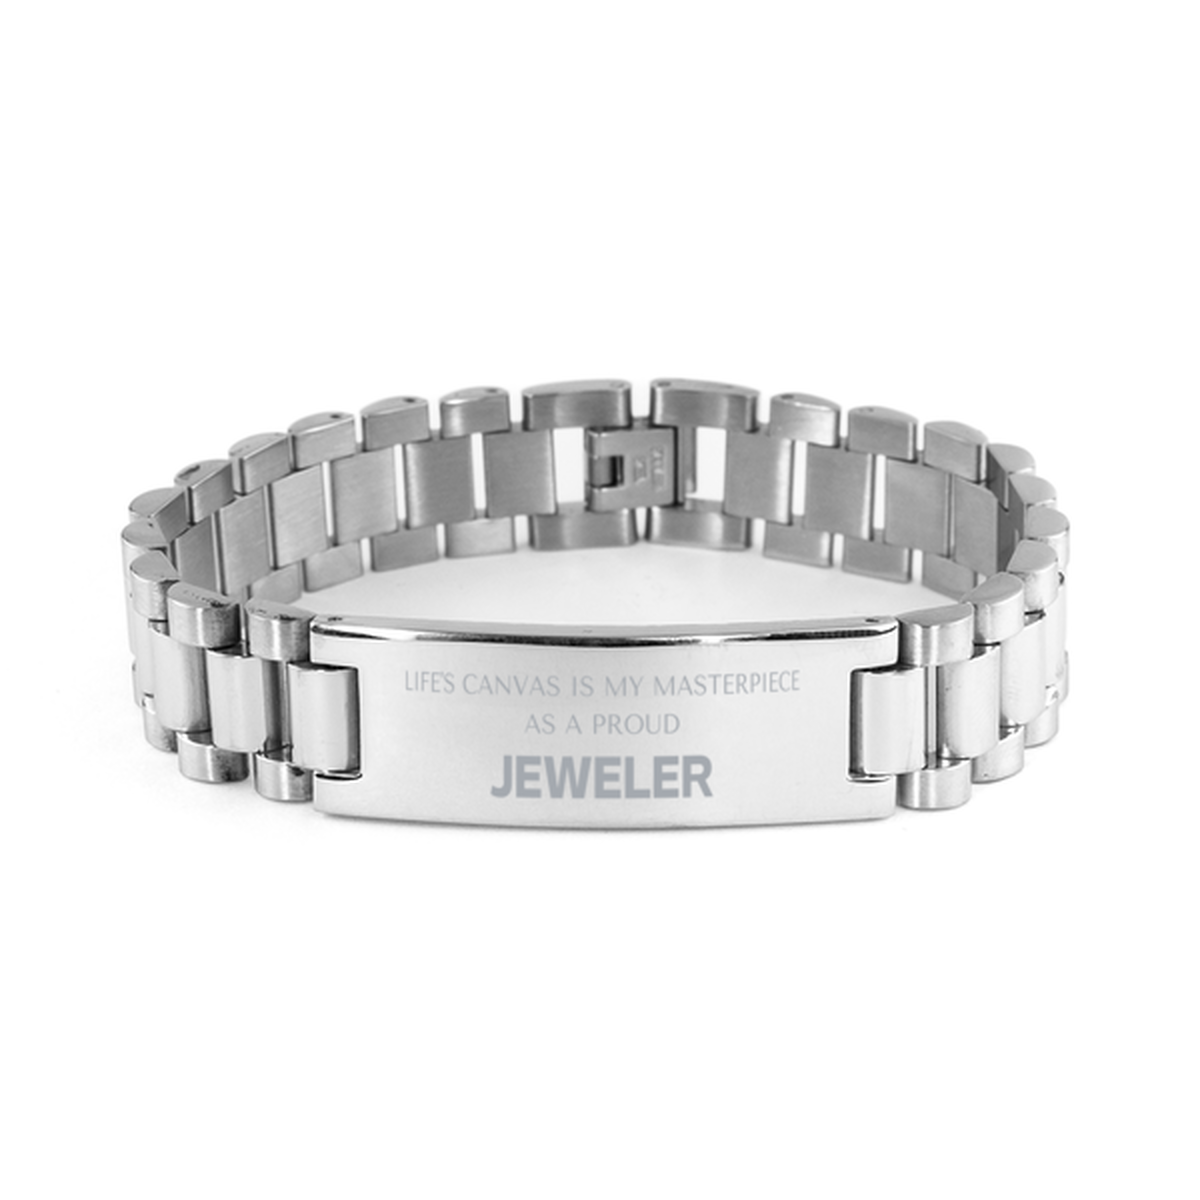 Proud Jeweler Gifts, Life's canvas is my masterpiece, Epic Birthday Christmas Unique Ladder Stainless Steel Bracelet For Jeweler, Coworkers, Men, Women, Friends